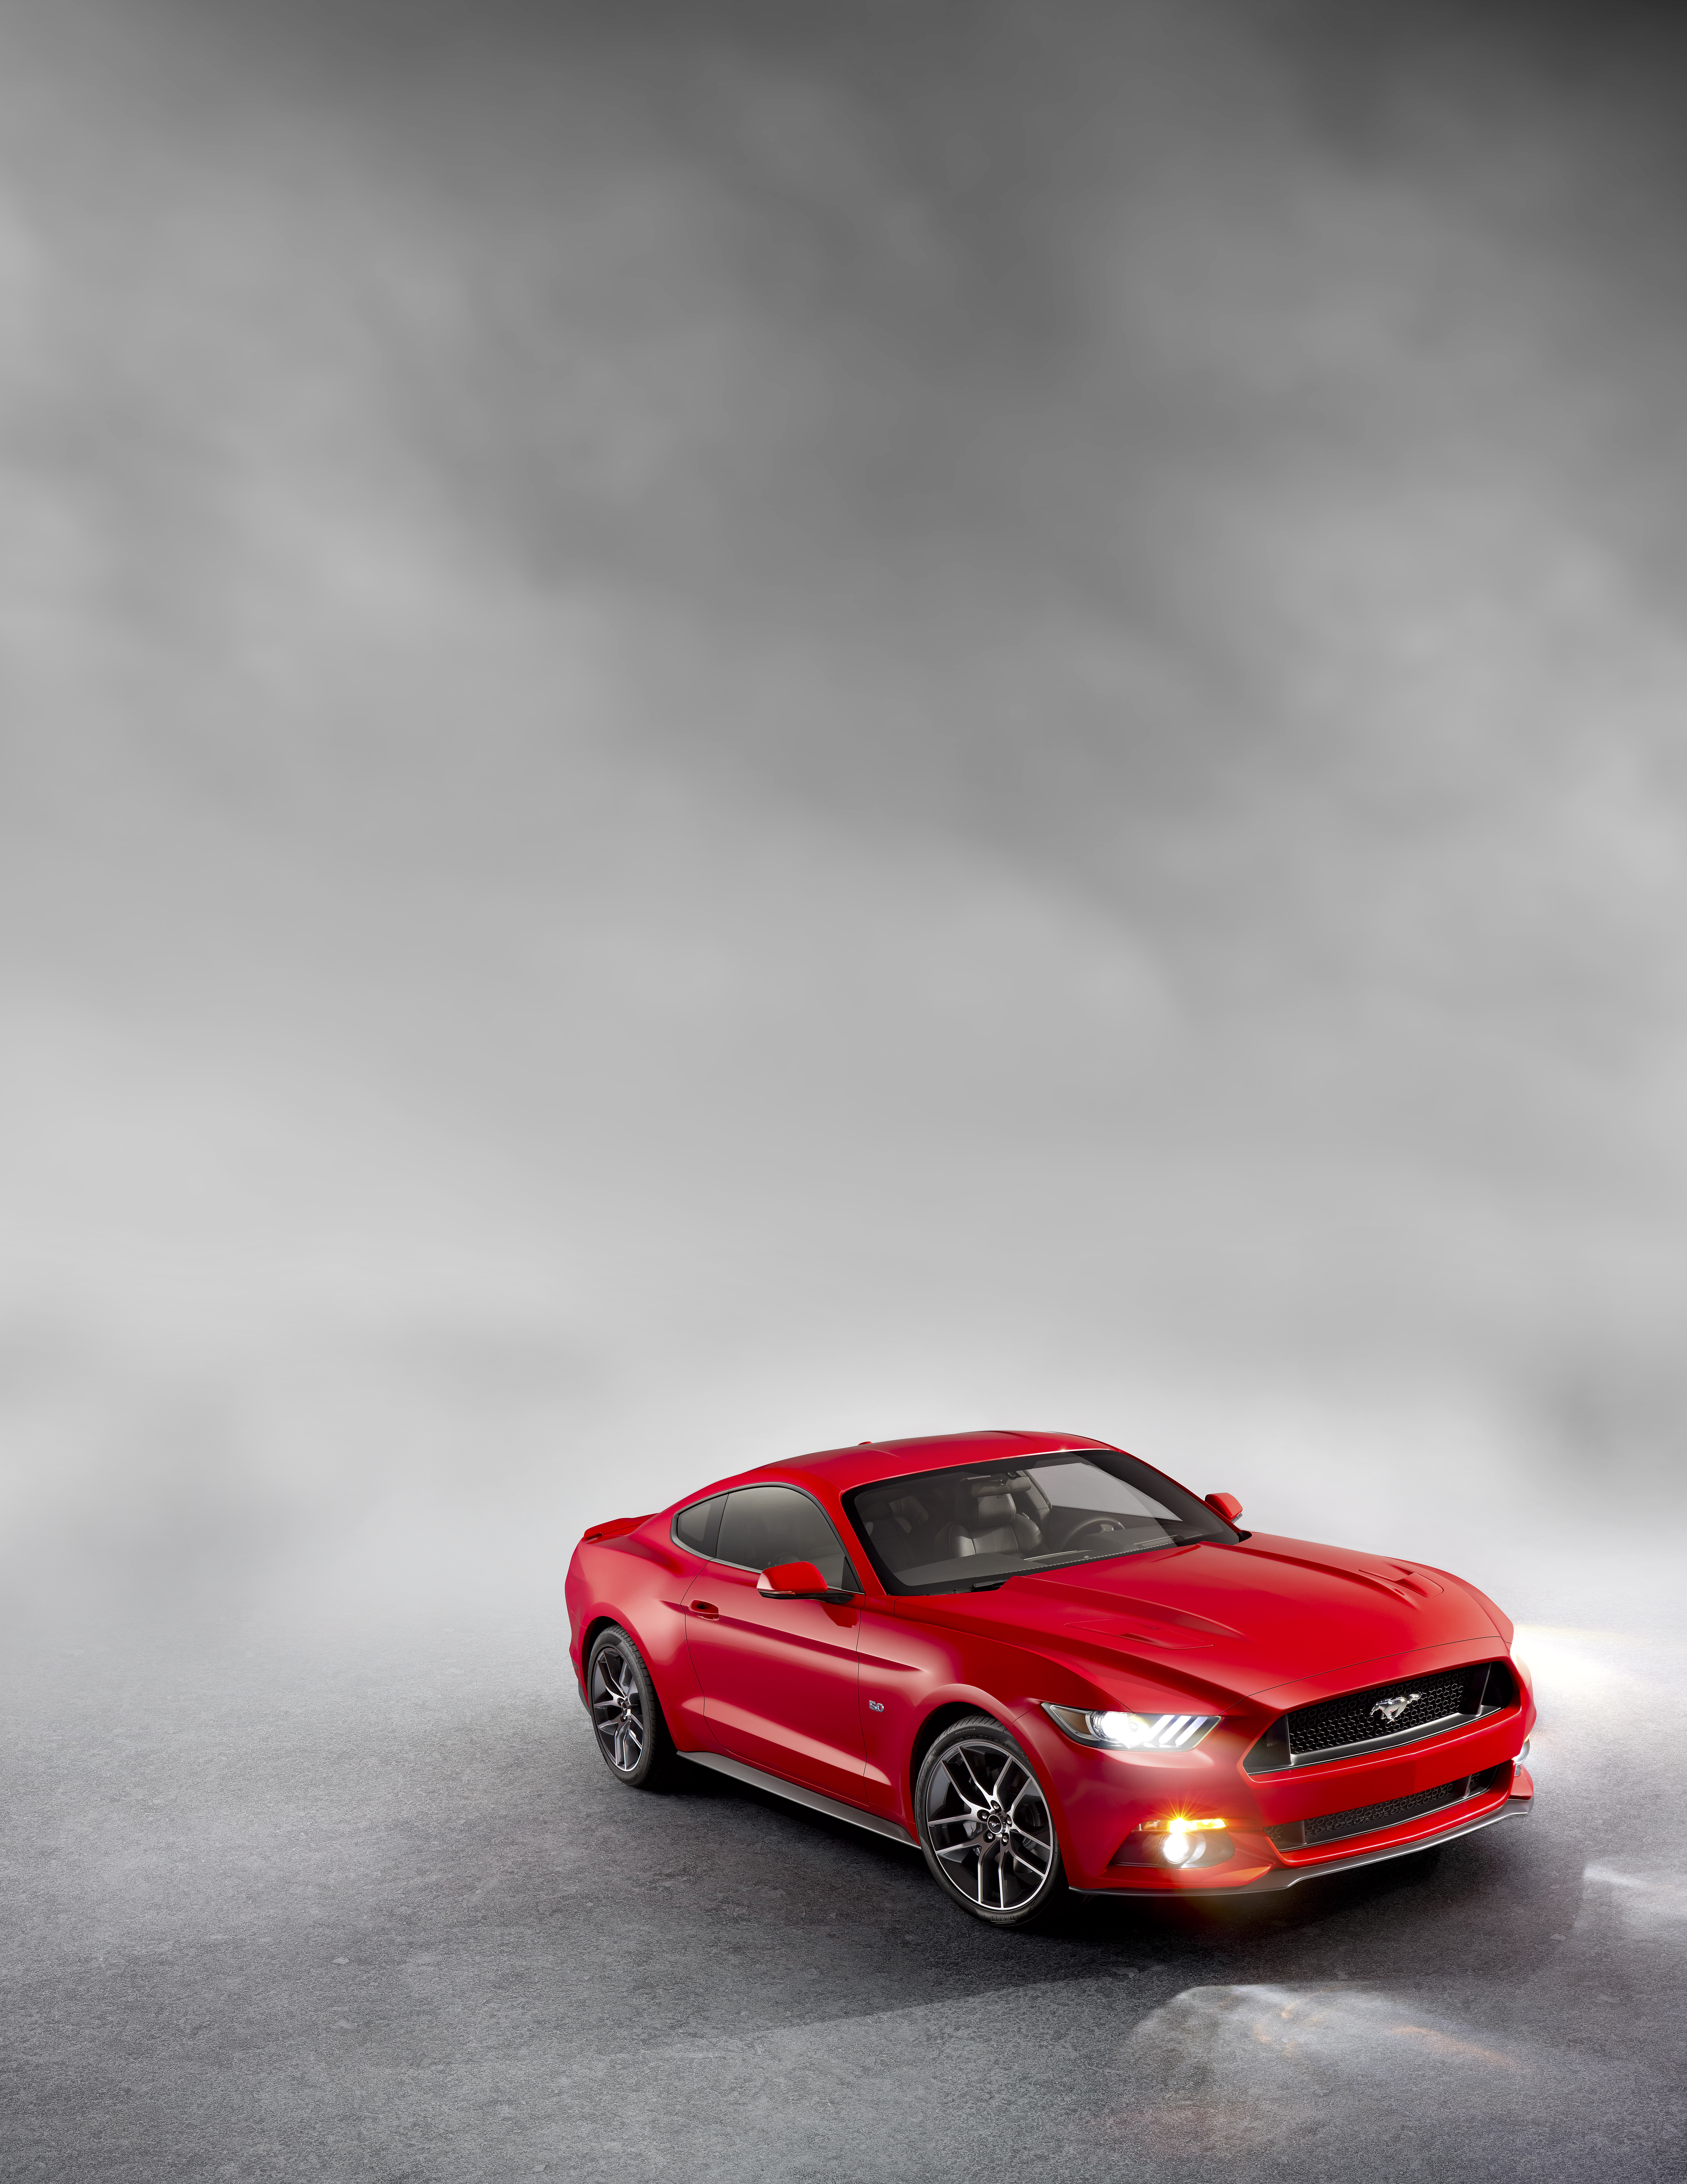 2015 Ford Mustang. Photo / Supplied